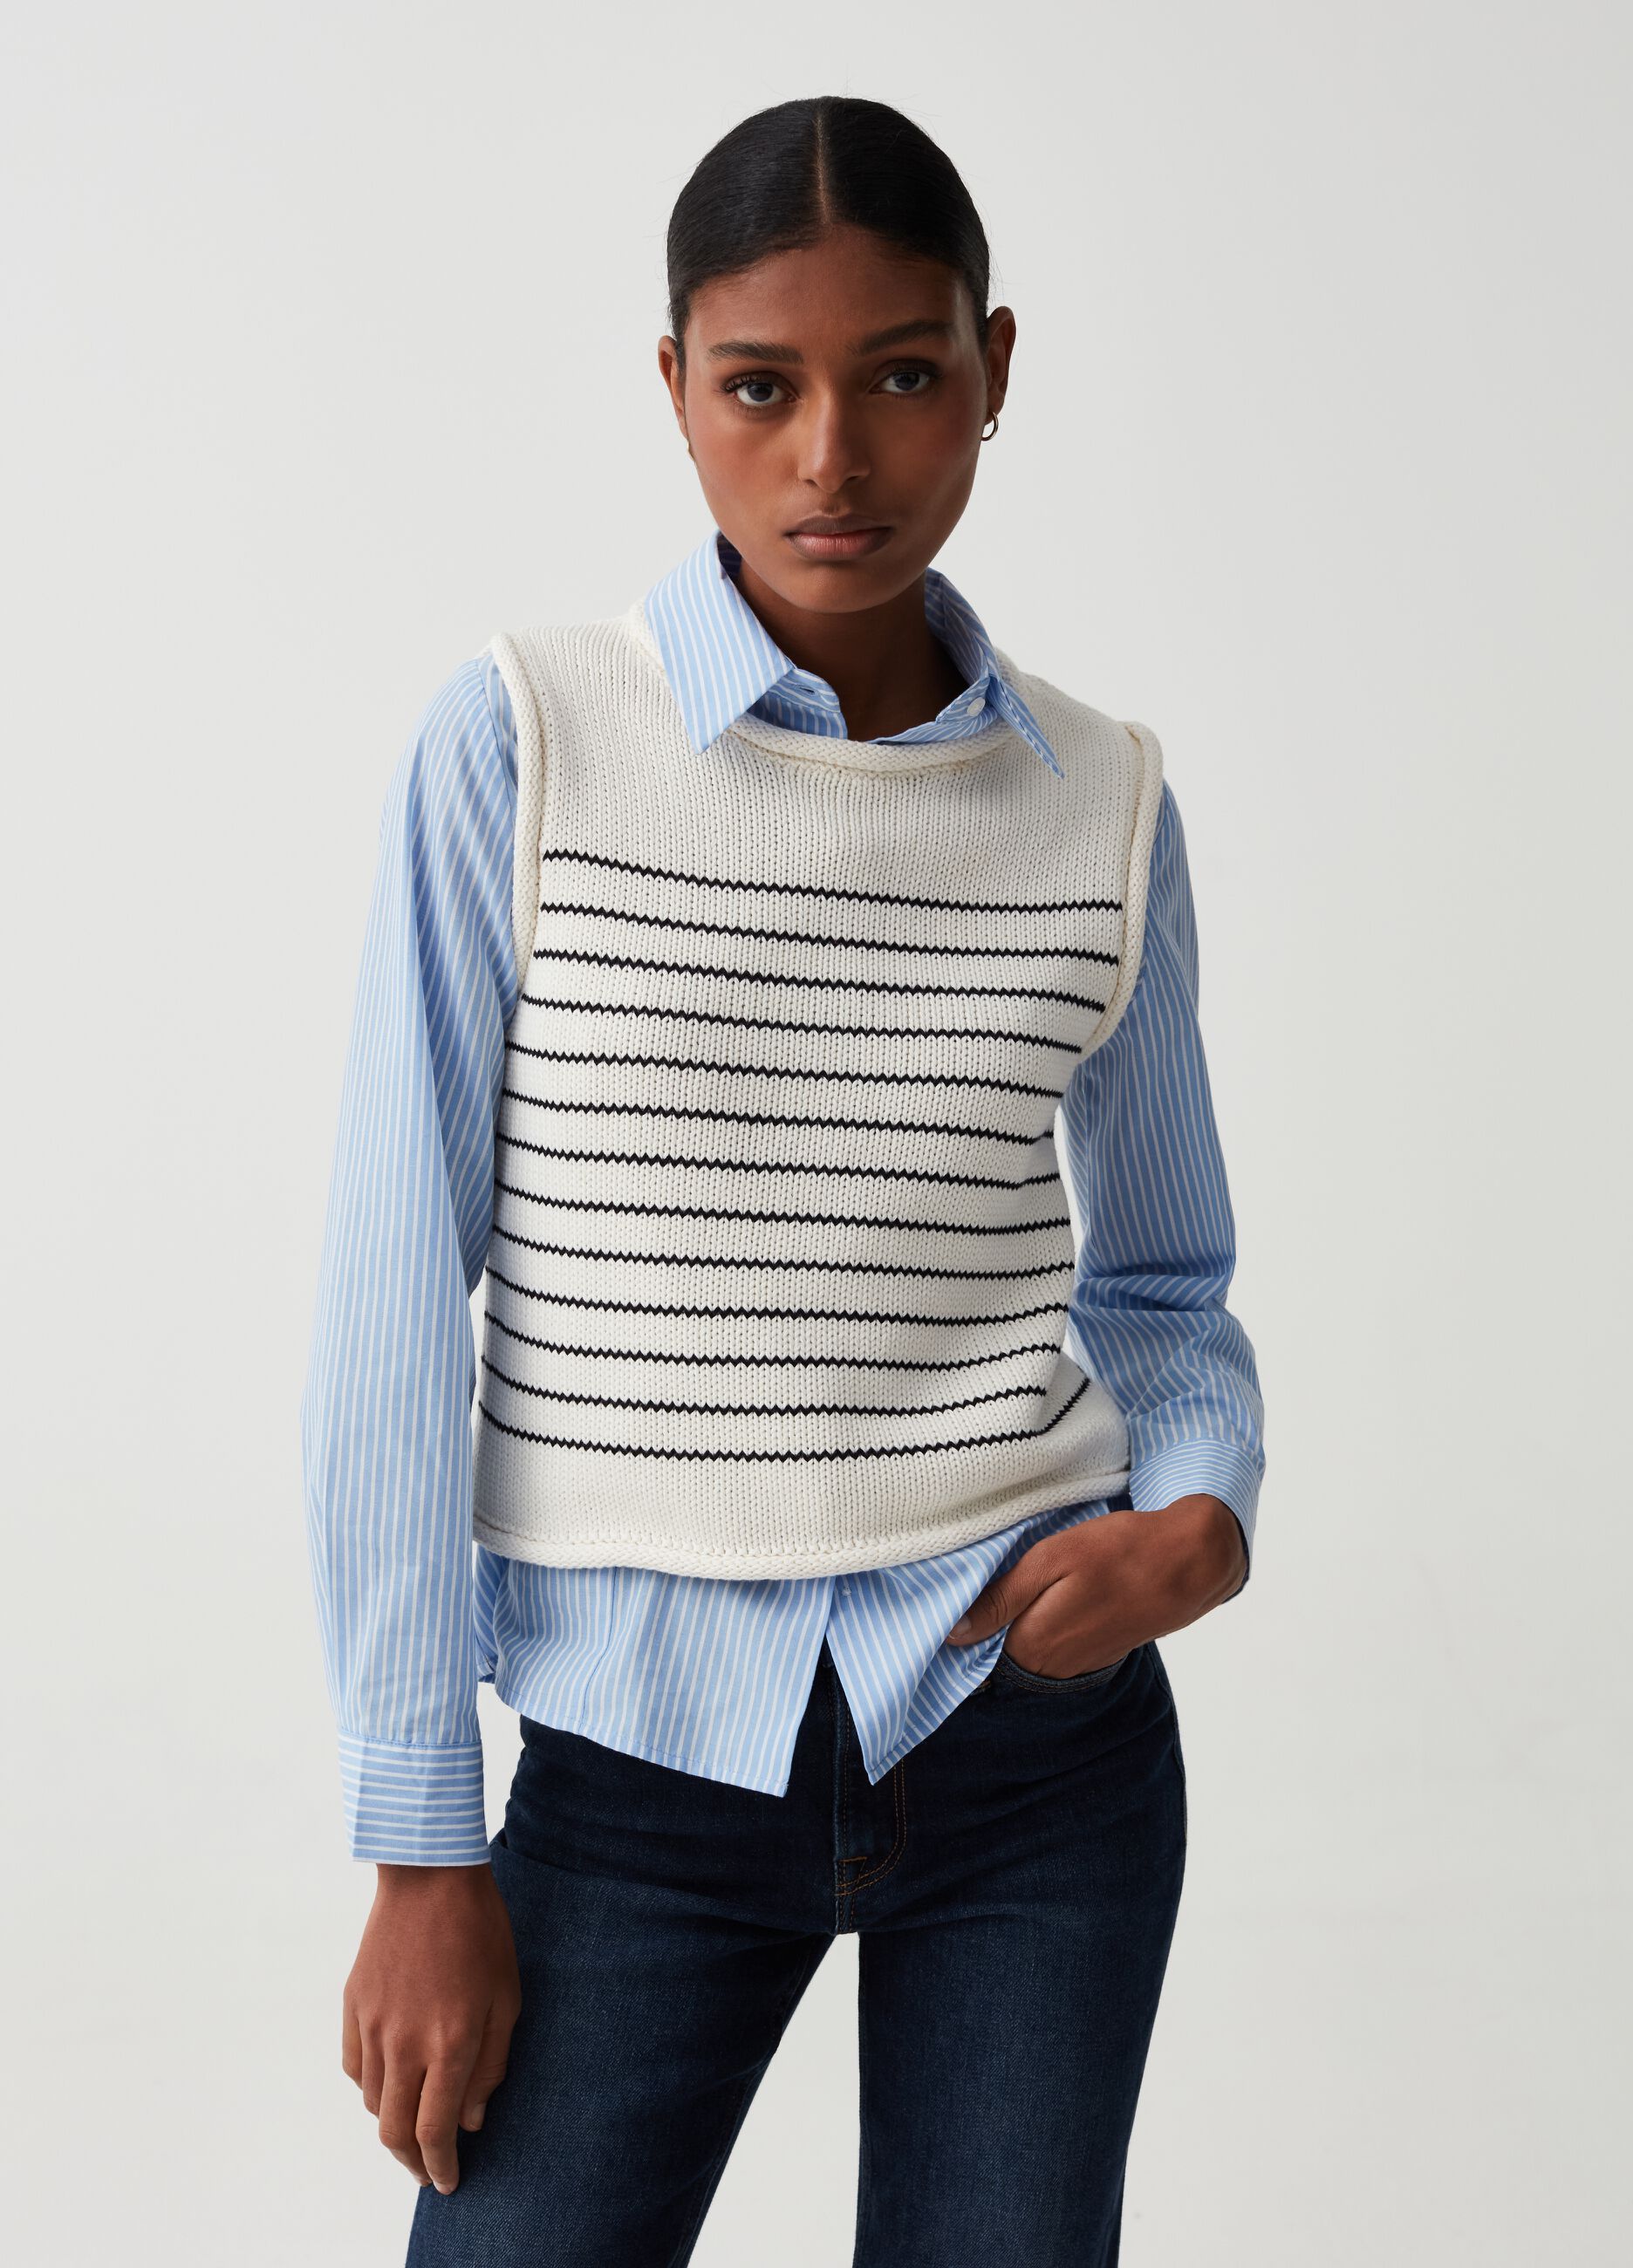 Closed gilet with striped jacquard motif